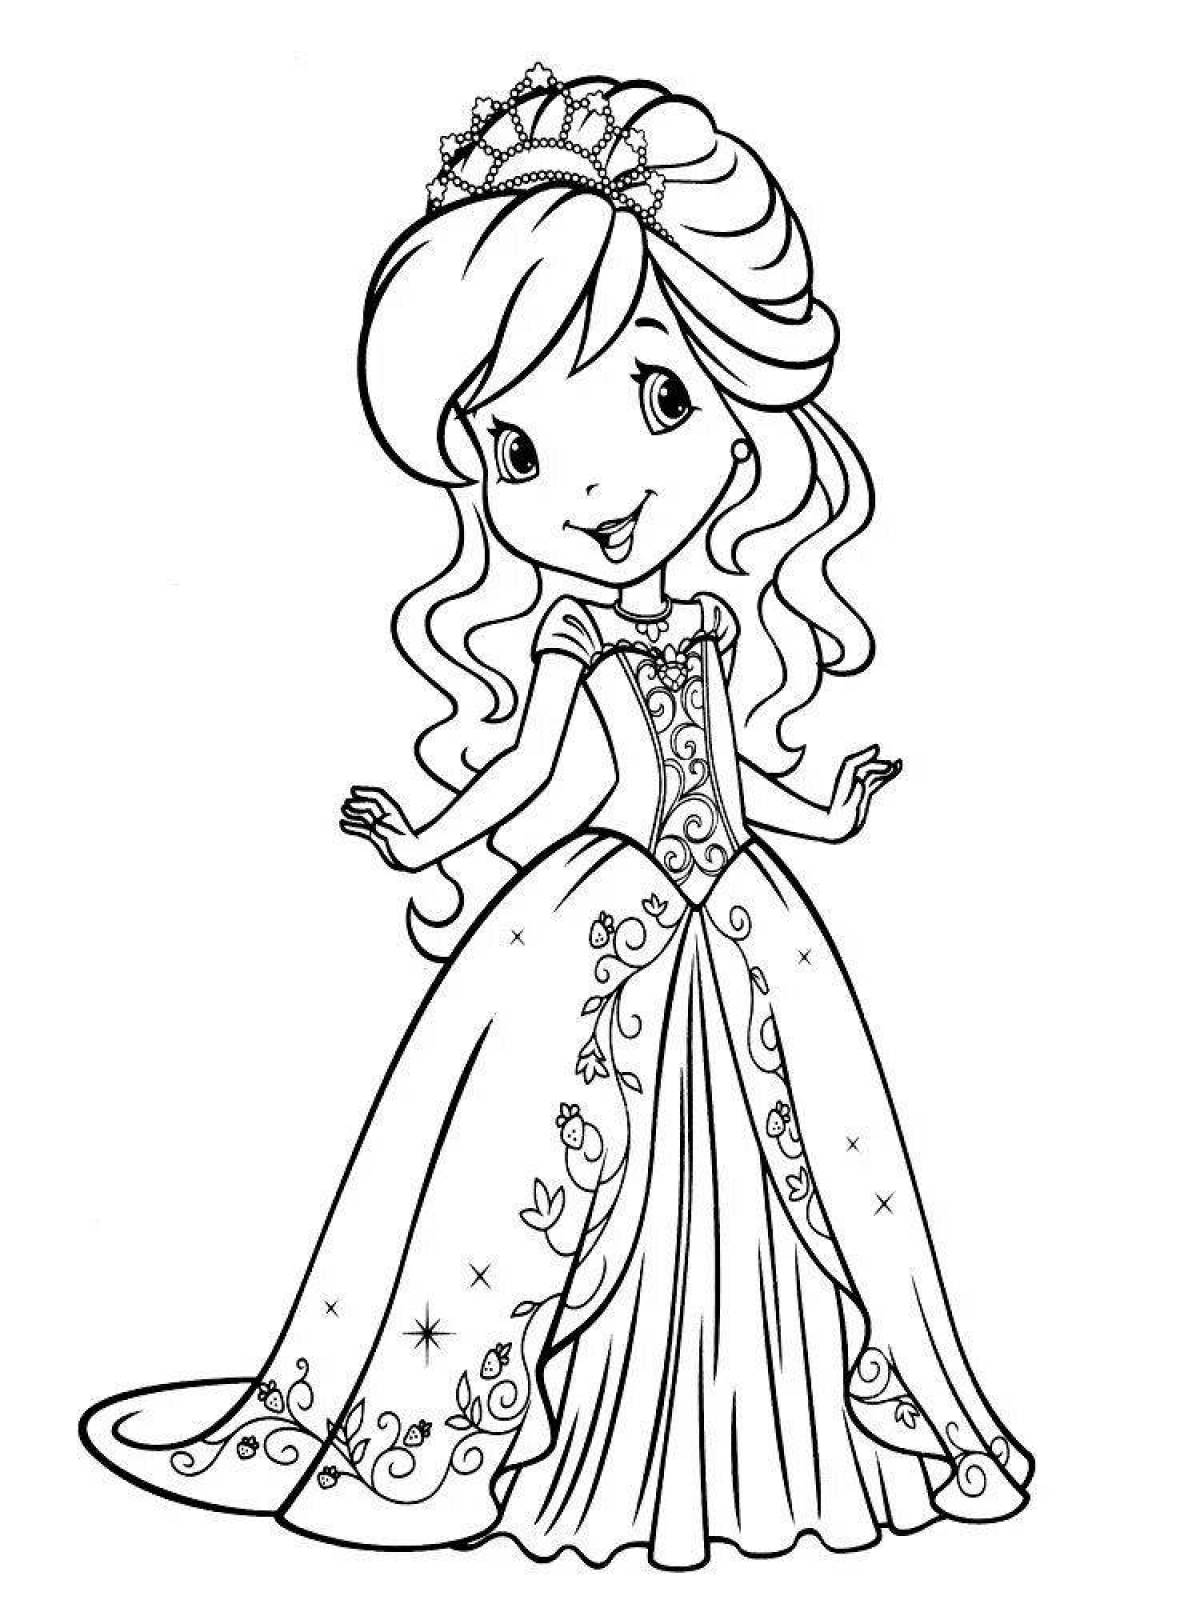 Glowing valberis coloring page